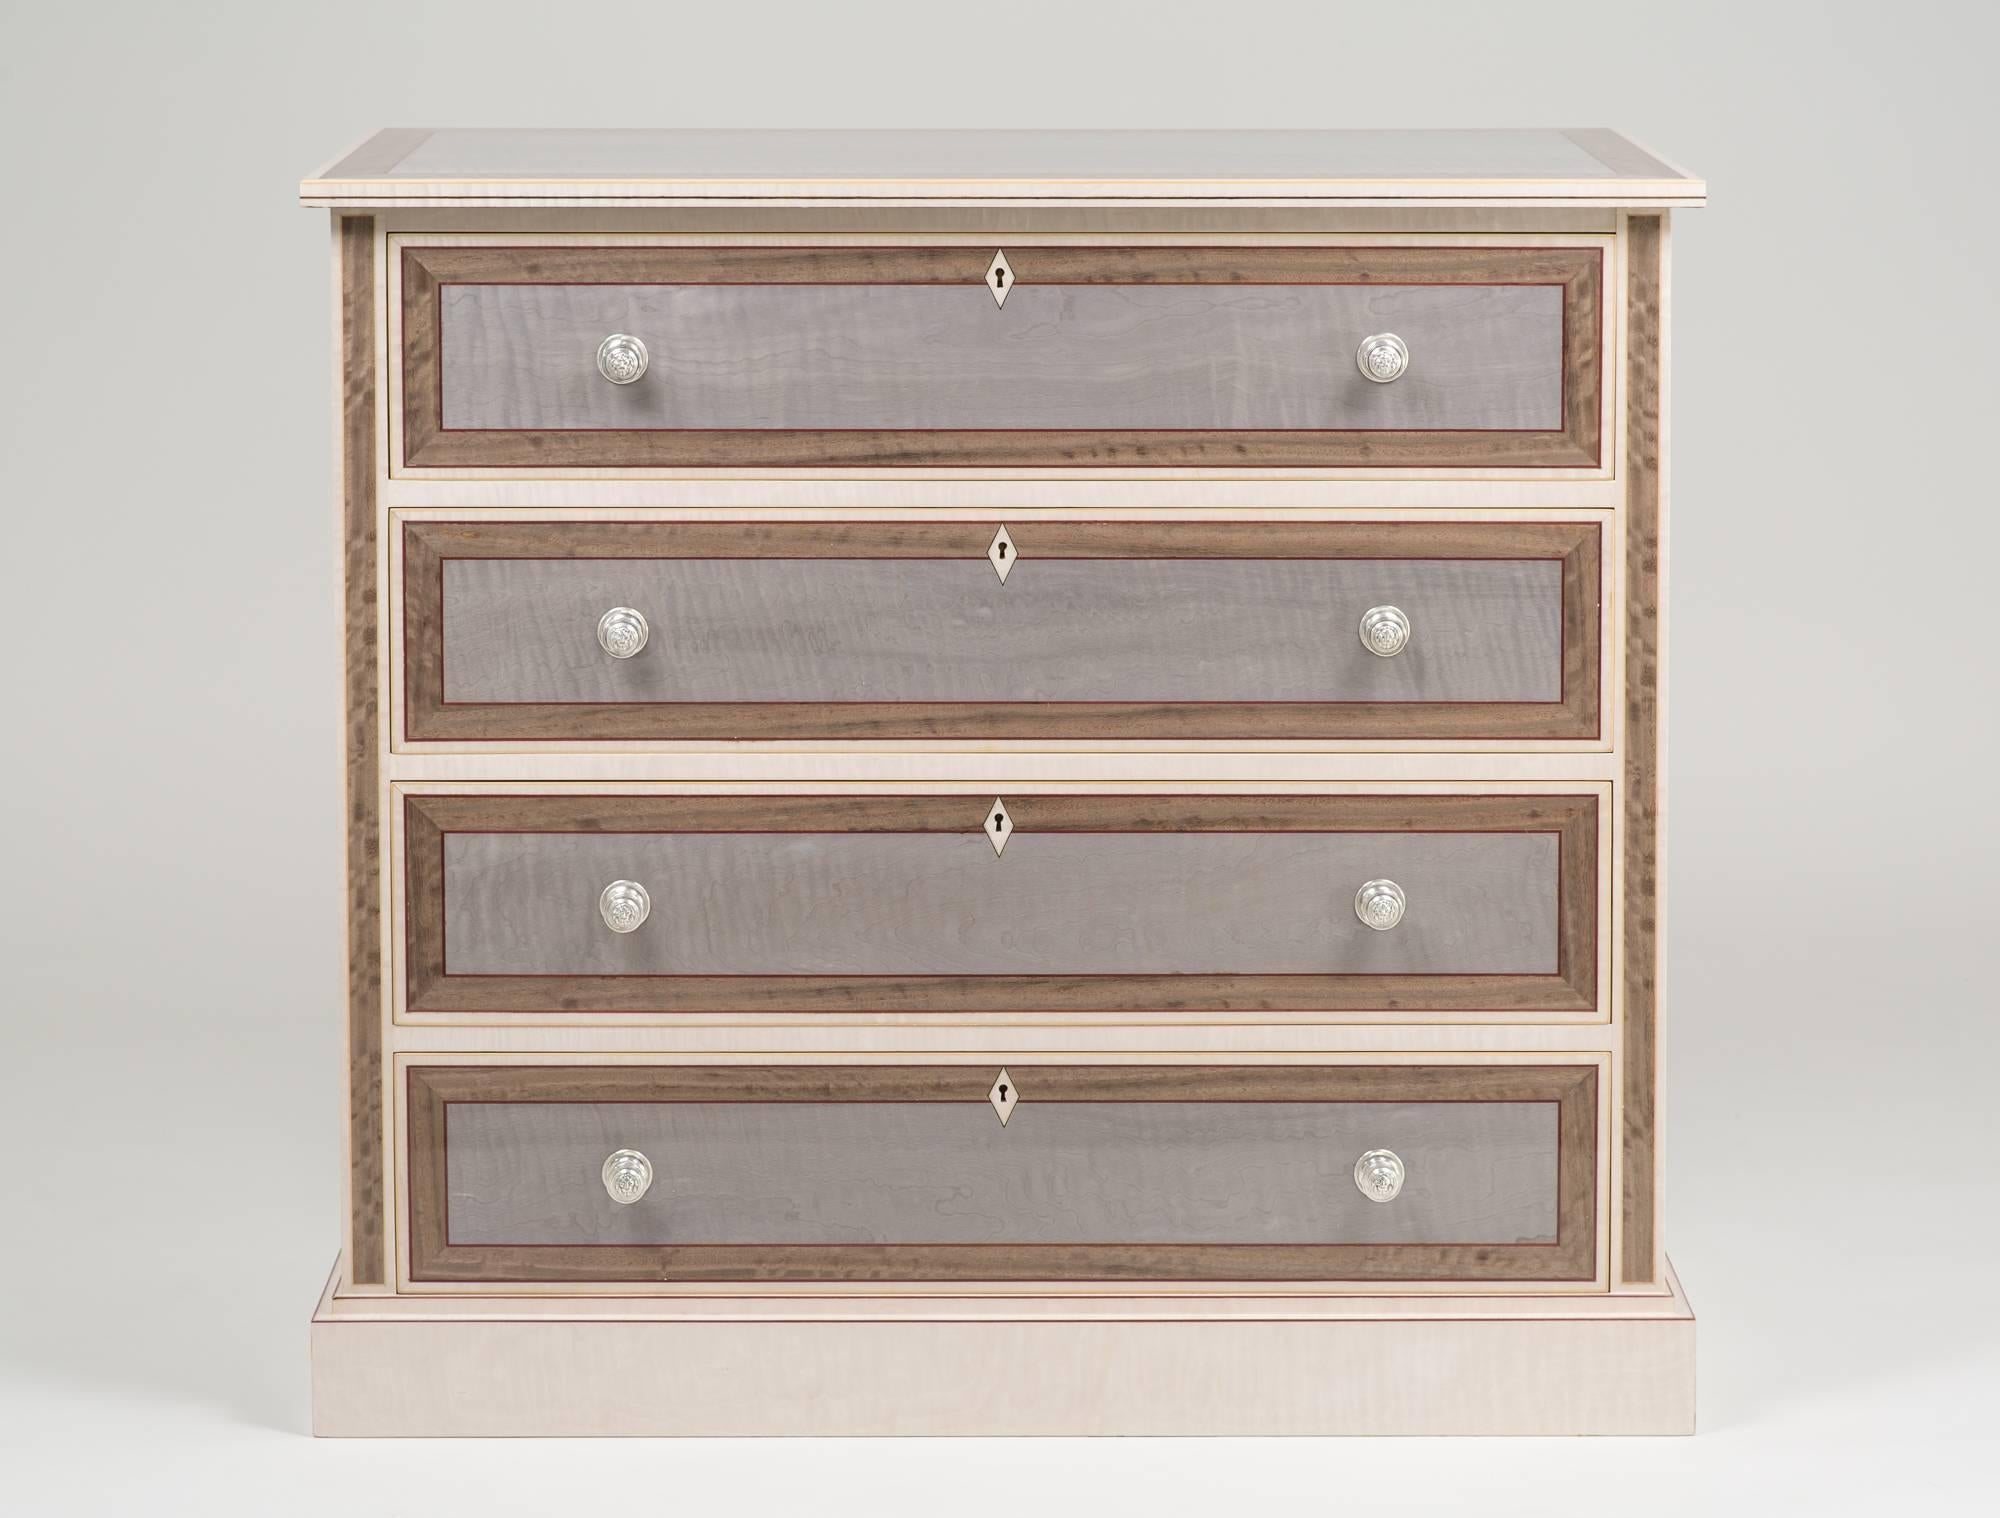 This magnificent chest of drawers is handcrafted by our highly skilled English craftsmen deep in the heart of the Sussex countryside in England. 
The sides and top are of Italian Sycamore within a Silver Eucalyptus framed banding and lined with